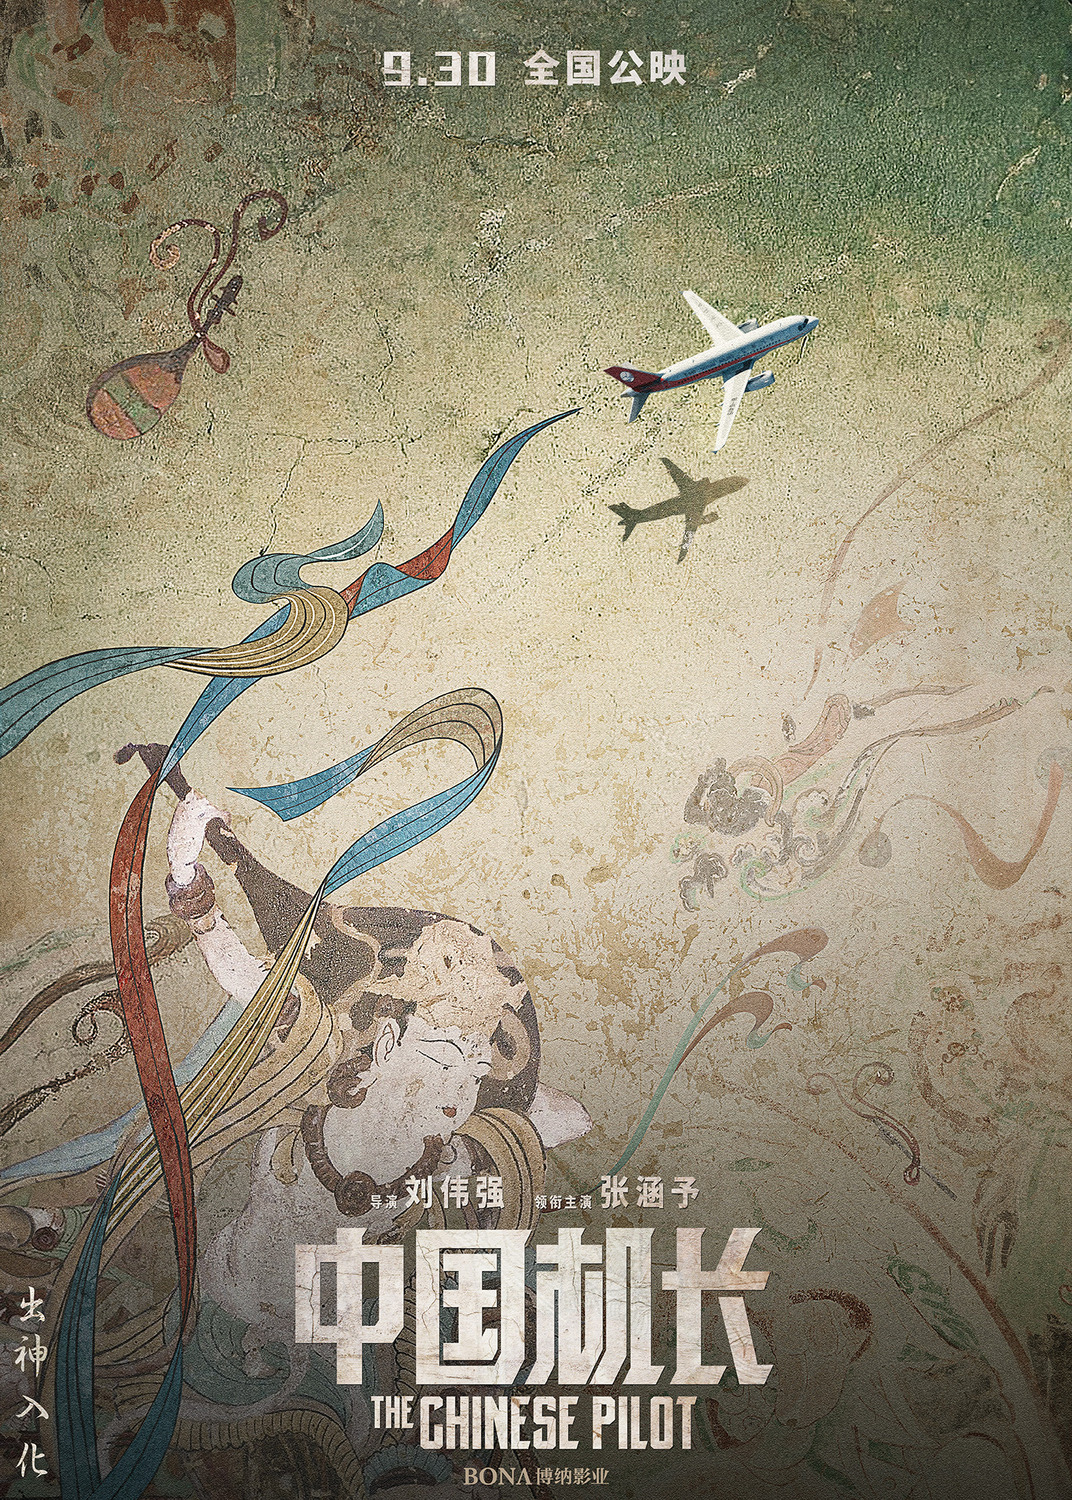 Extra Large Movie Poster Image for The Chinese Pilot (#15 of 17)